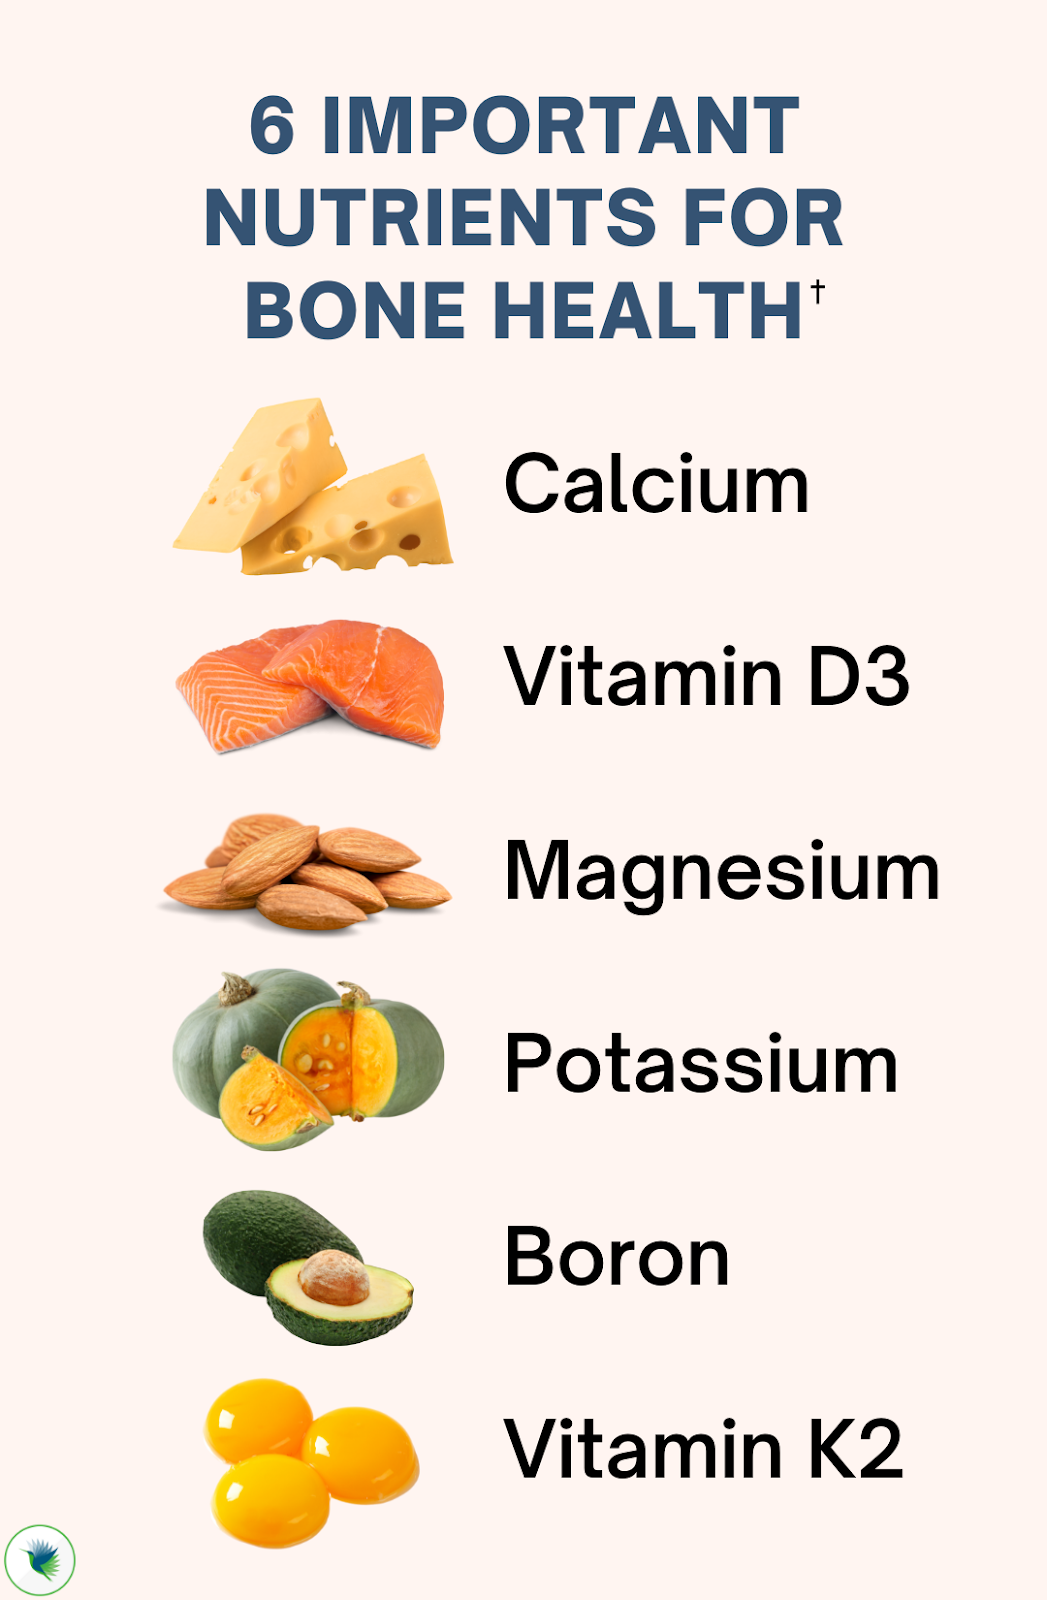 6 Important Nutrients for Bone Health